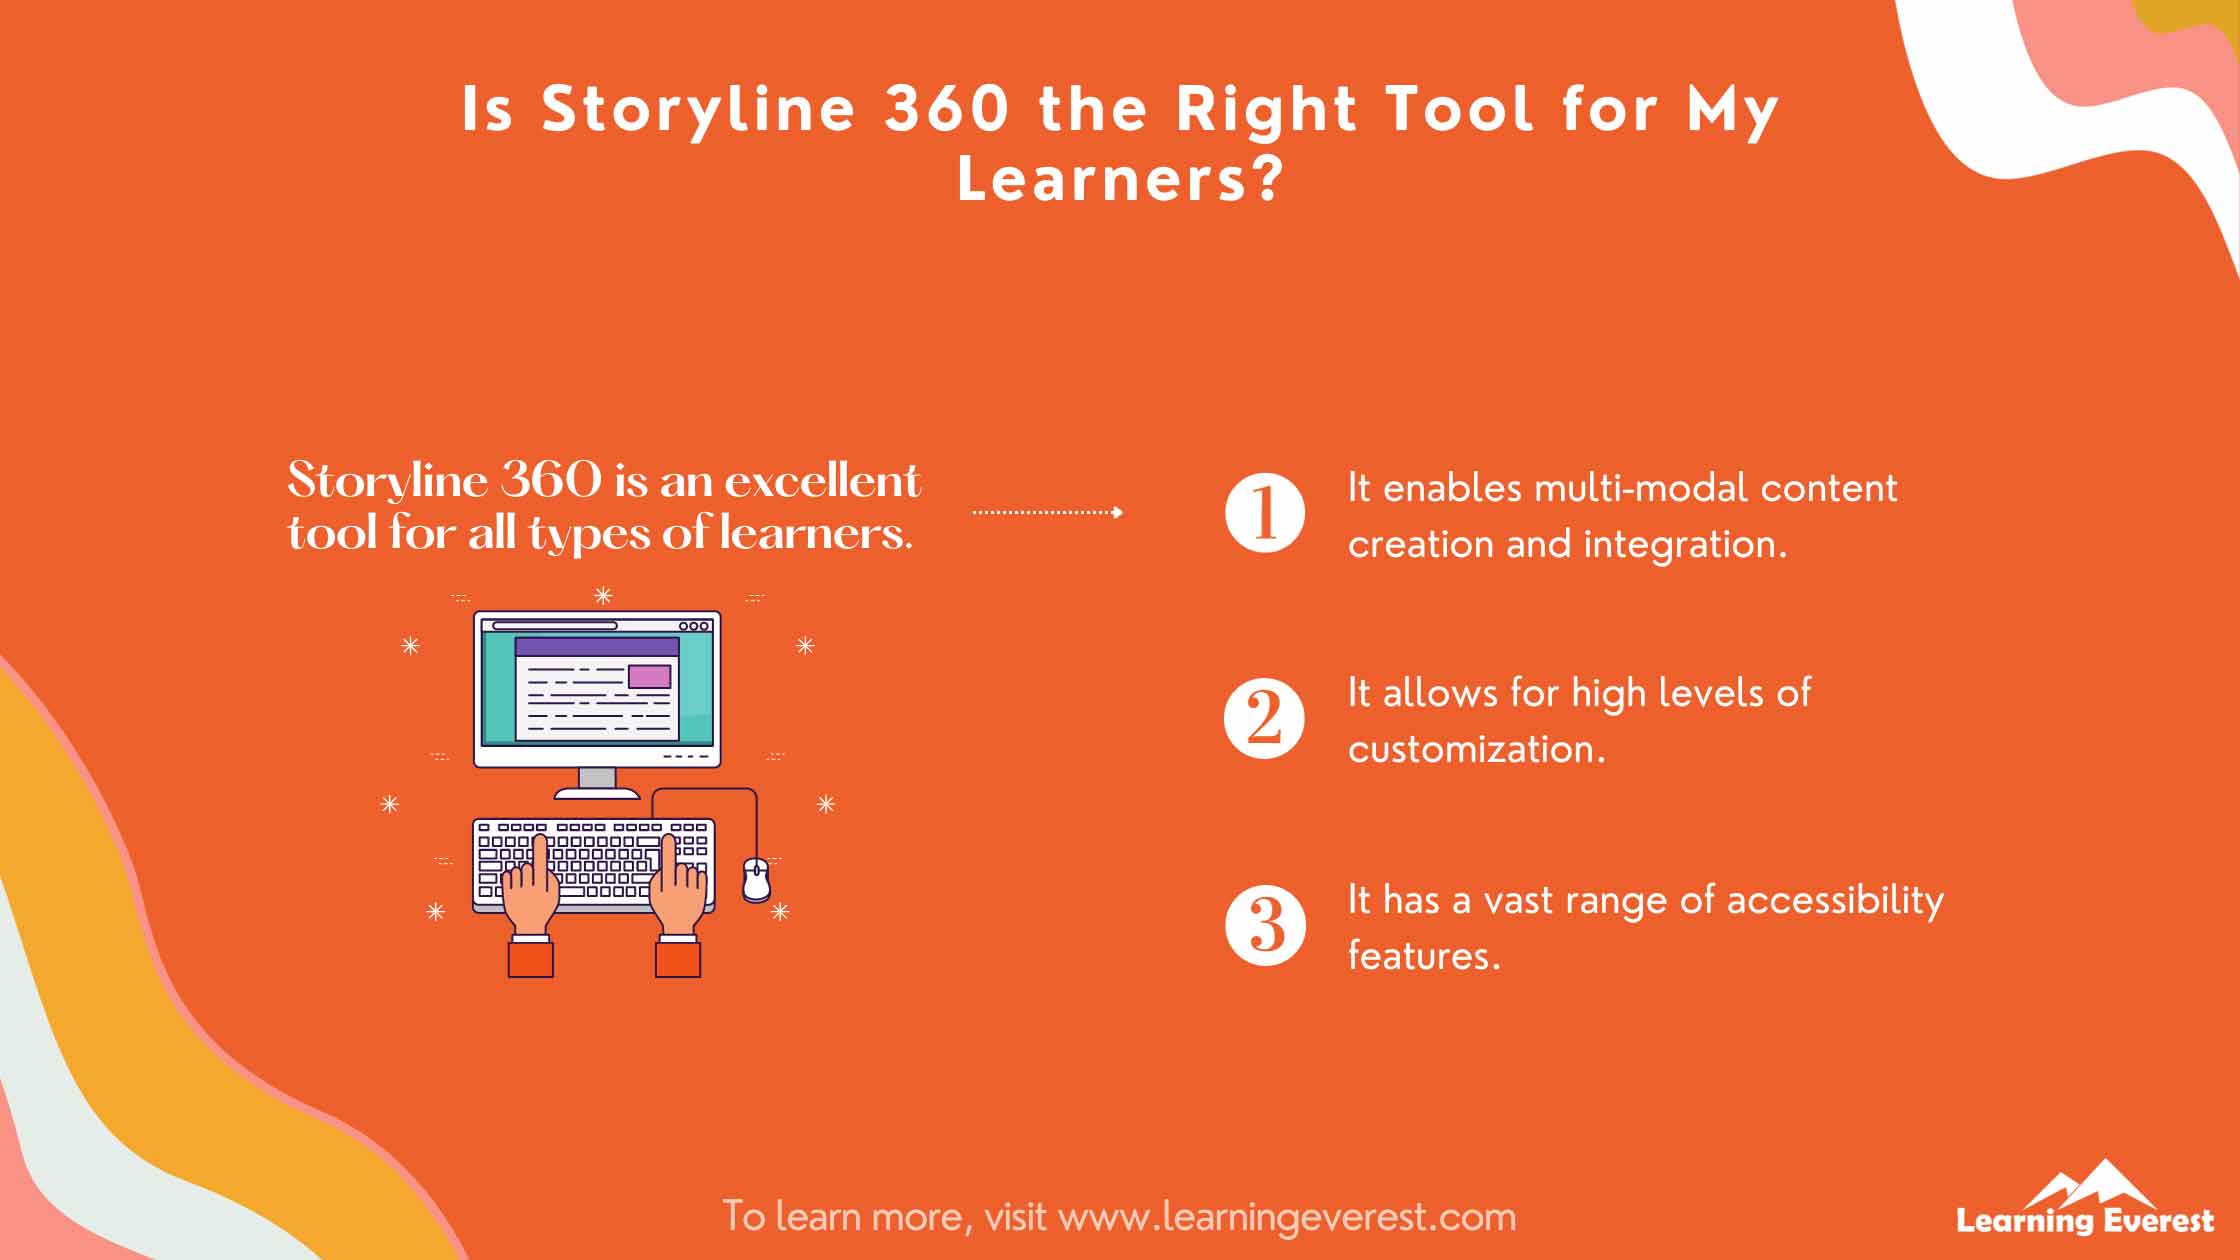 Is Storyline 360 the Right Tool for My Learners